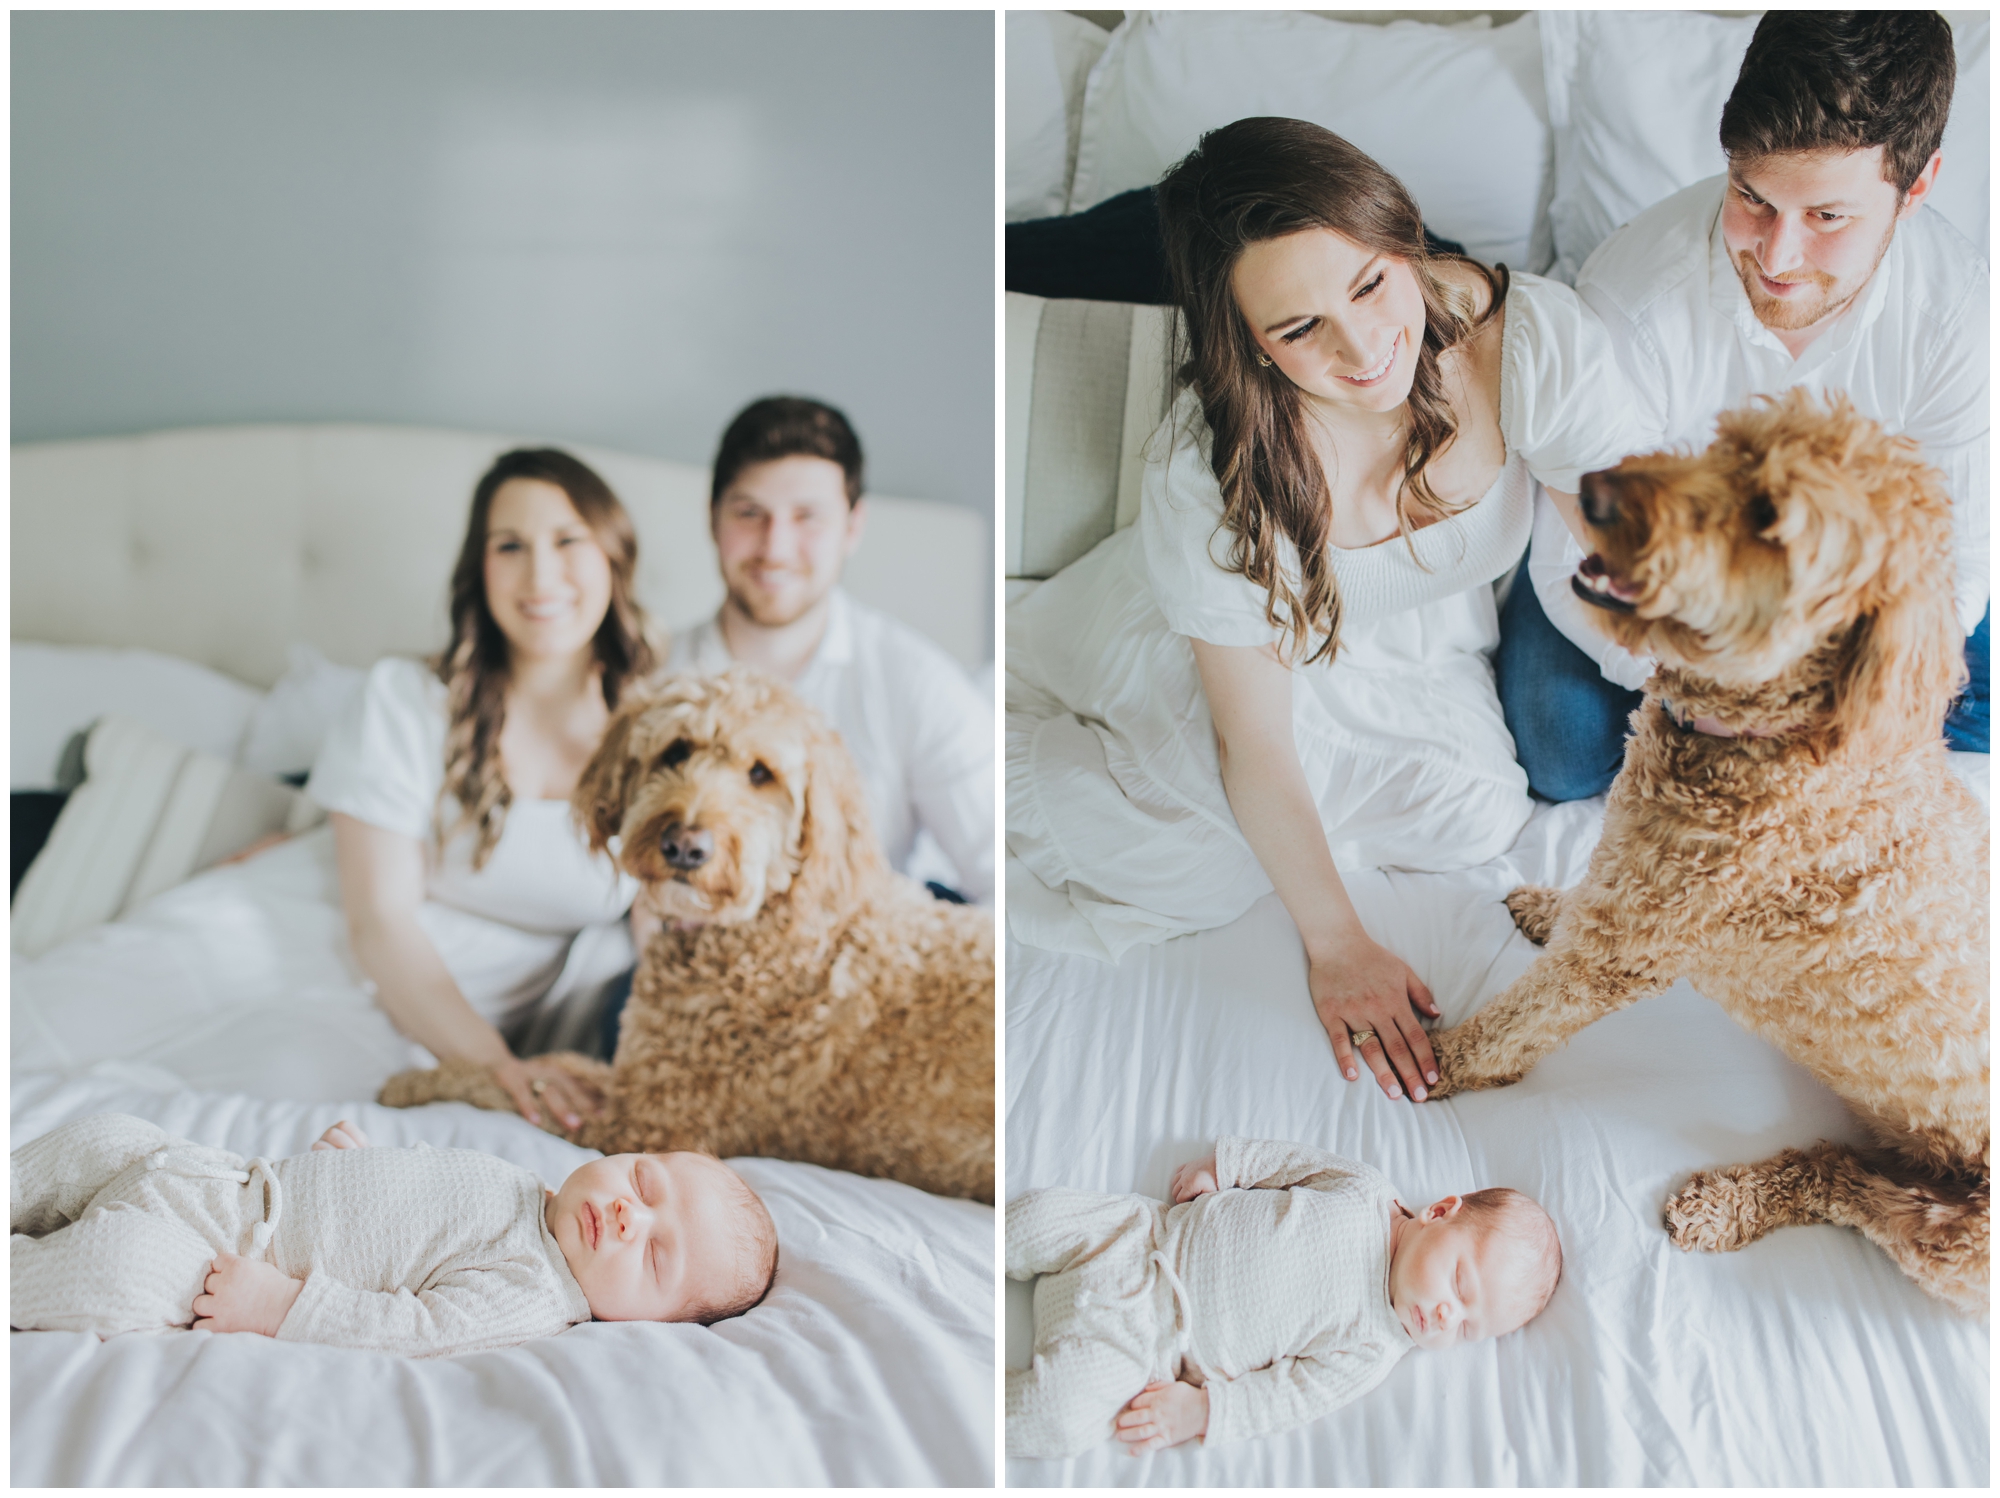 in-home Chicago newborn session, photographed by Meg Adamik Creative